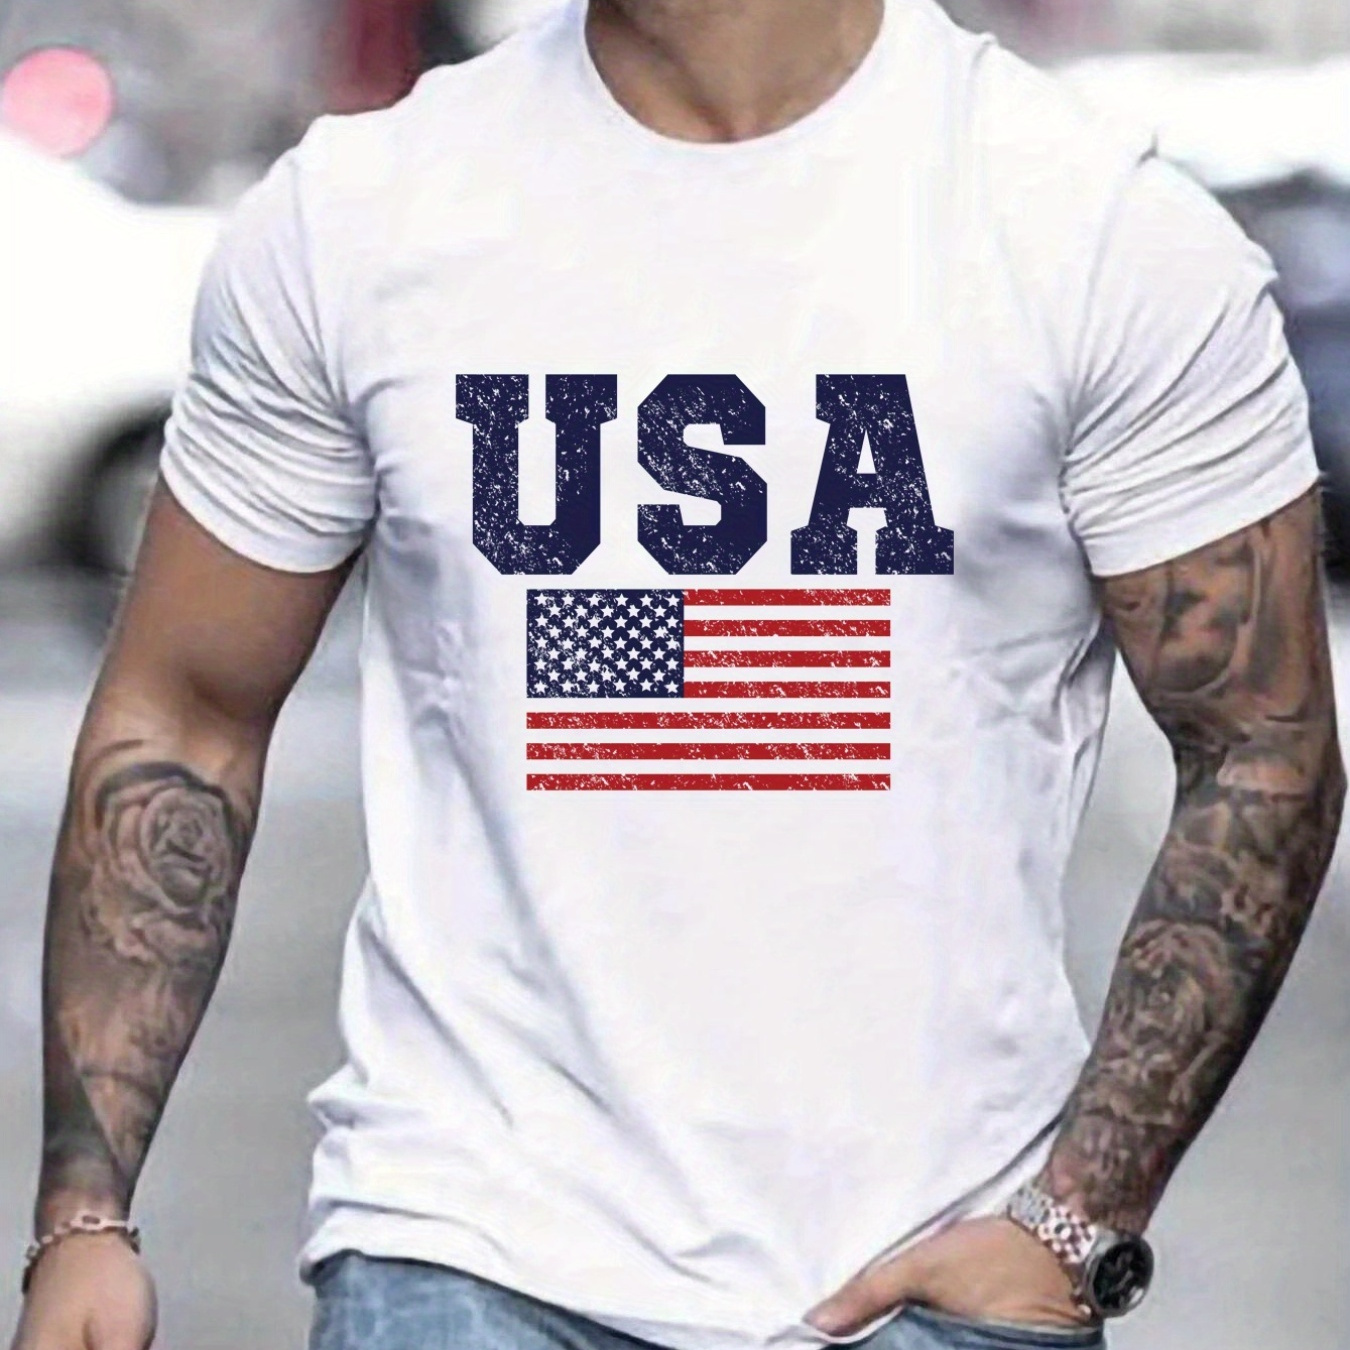 

'usa' Pattern Print Men's Comfy T-shirt, Graphic Tee Men's Summer Outdoor Clothes, Men's Clothing, Tops For Men